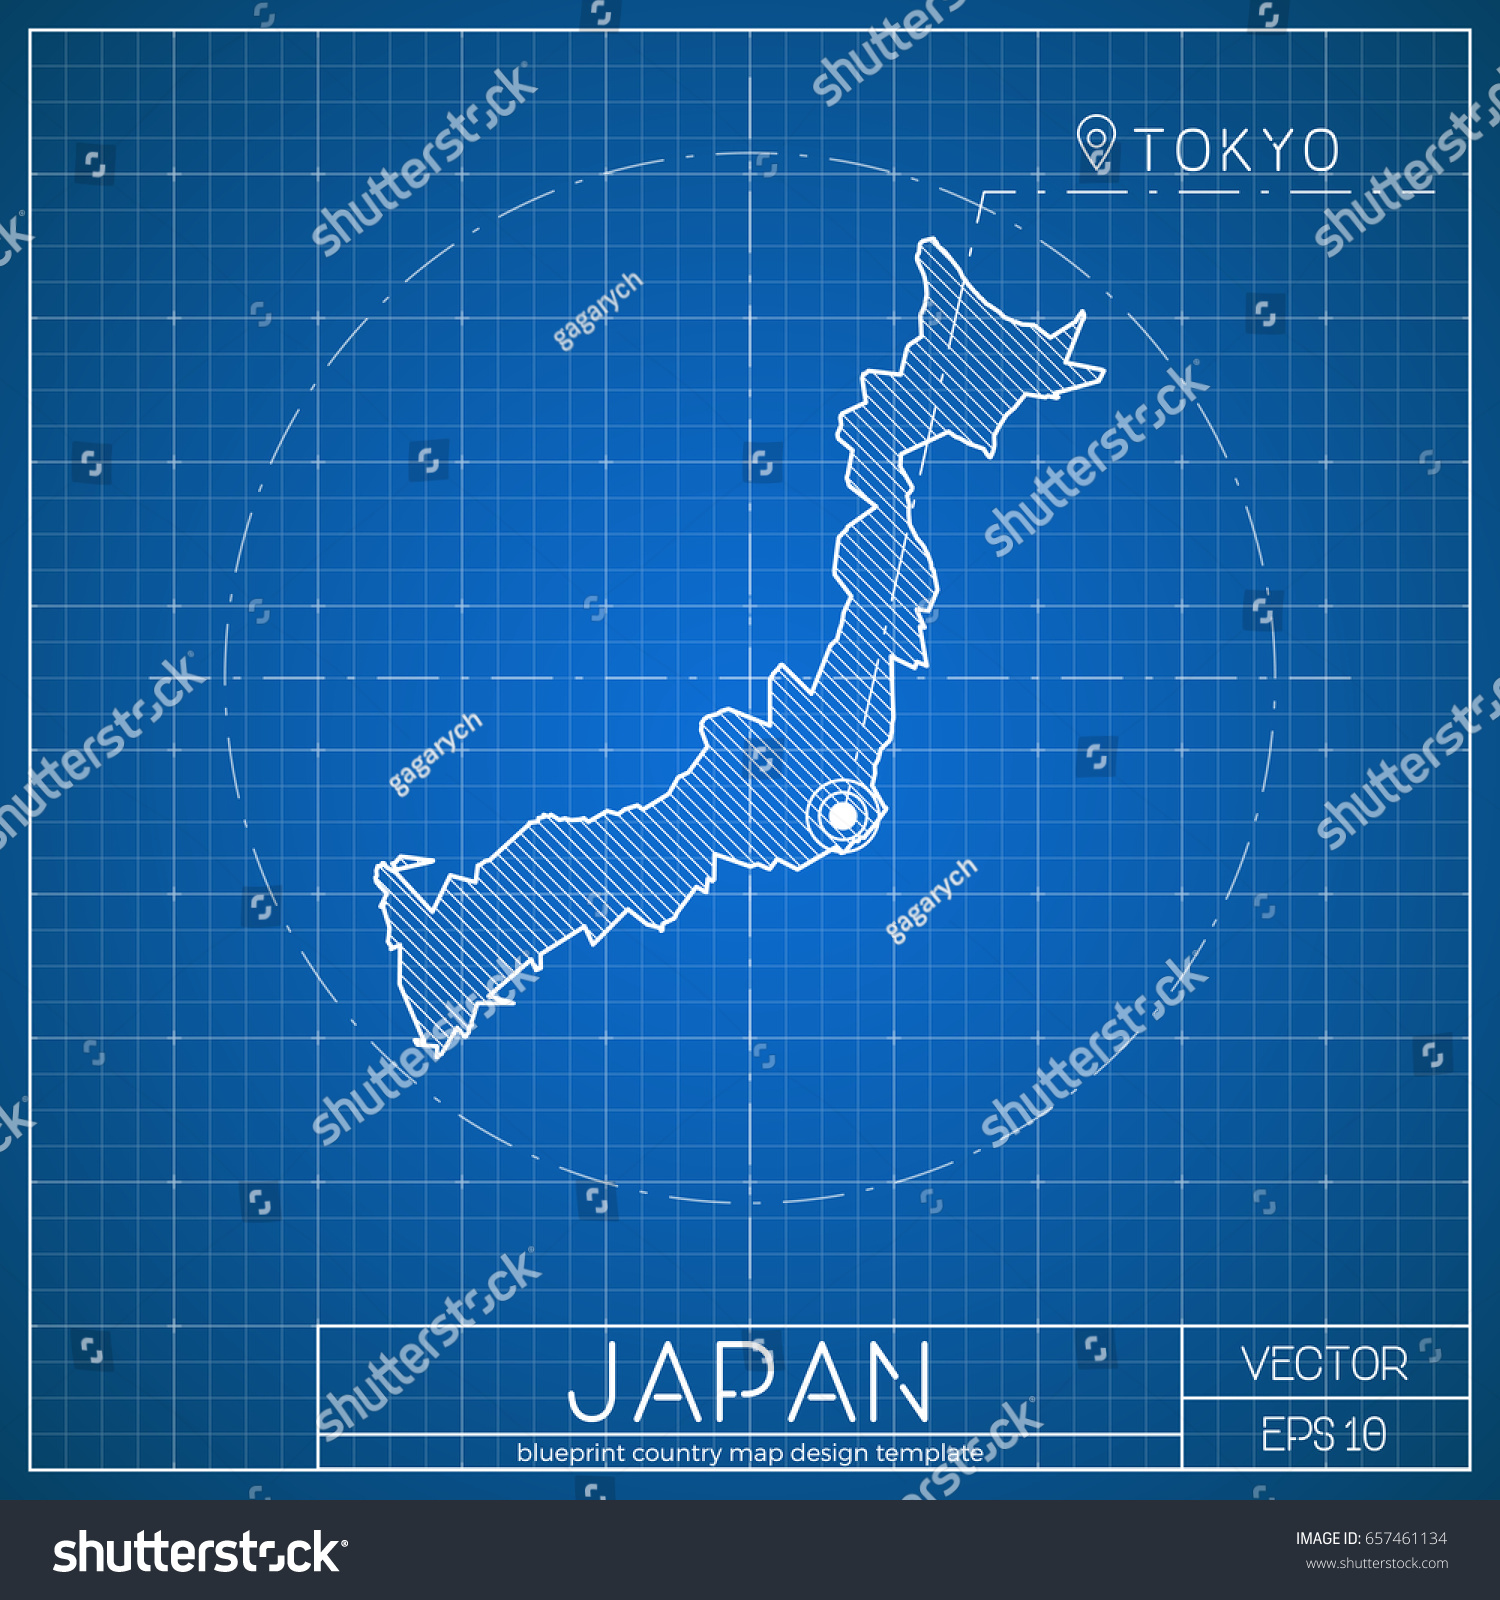 Stock Vector Japan Blueprint Map Template With Capital City Tokyo Marked On Blueprint Japanese Map Vector 657461134 